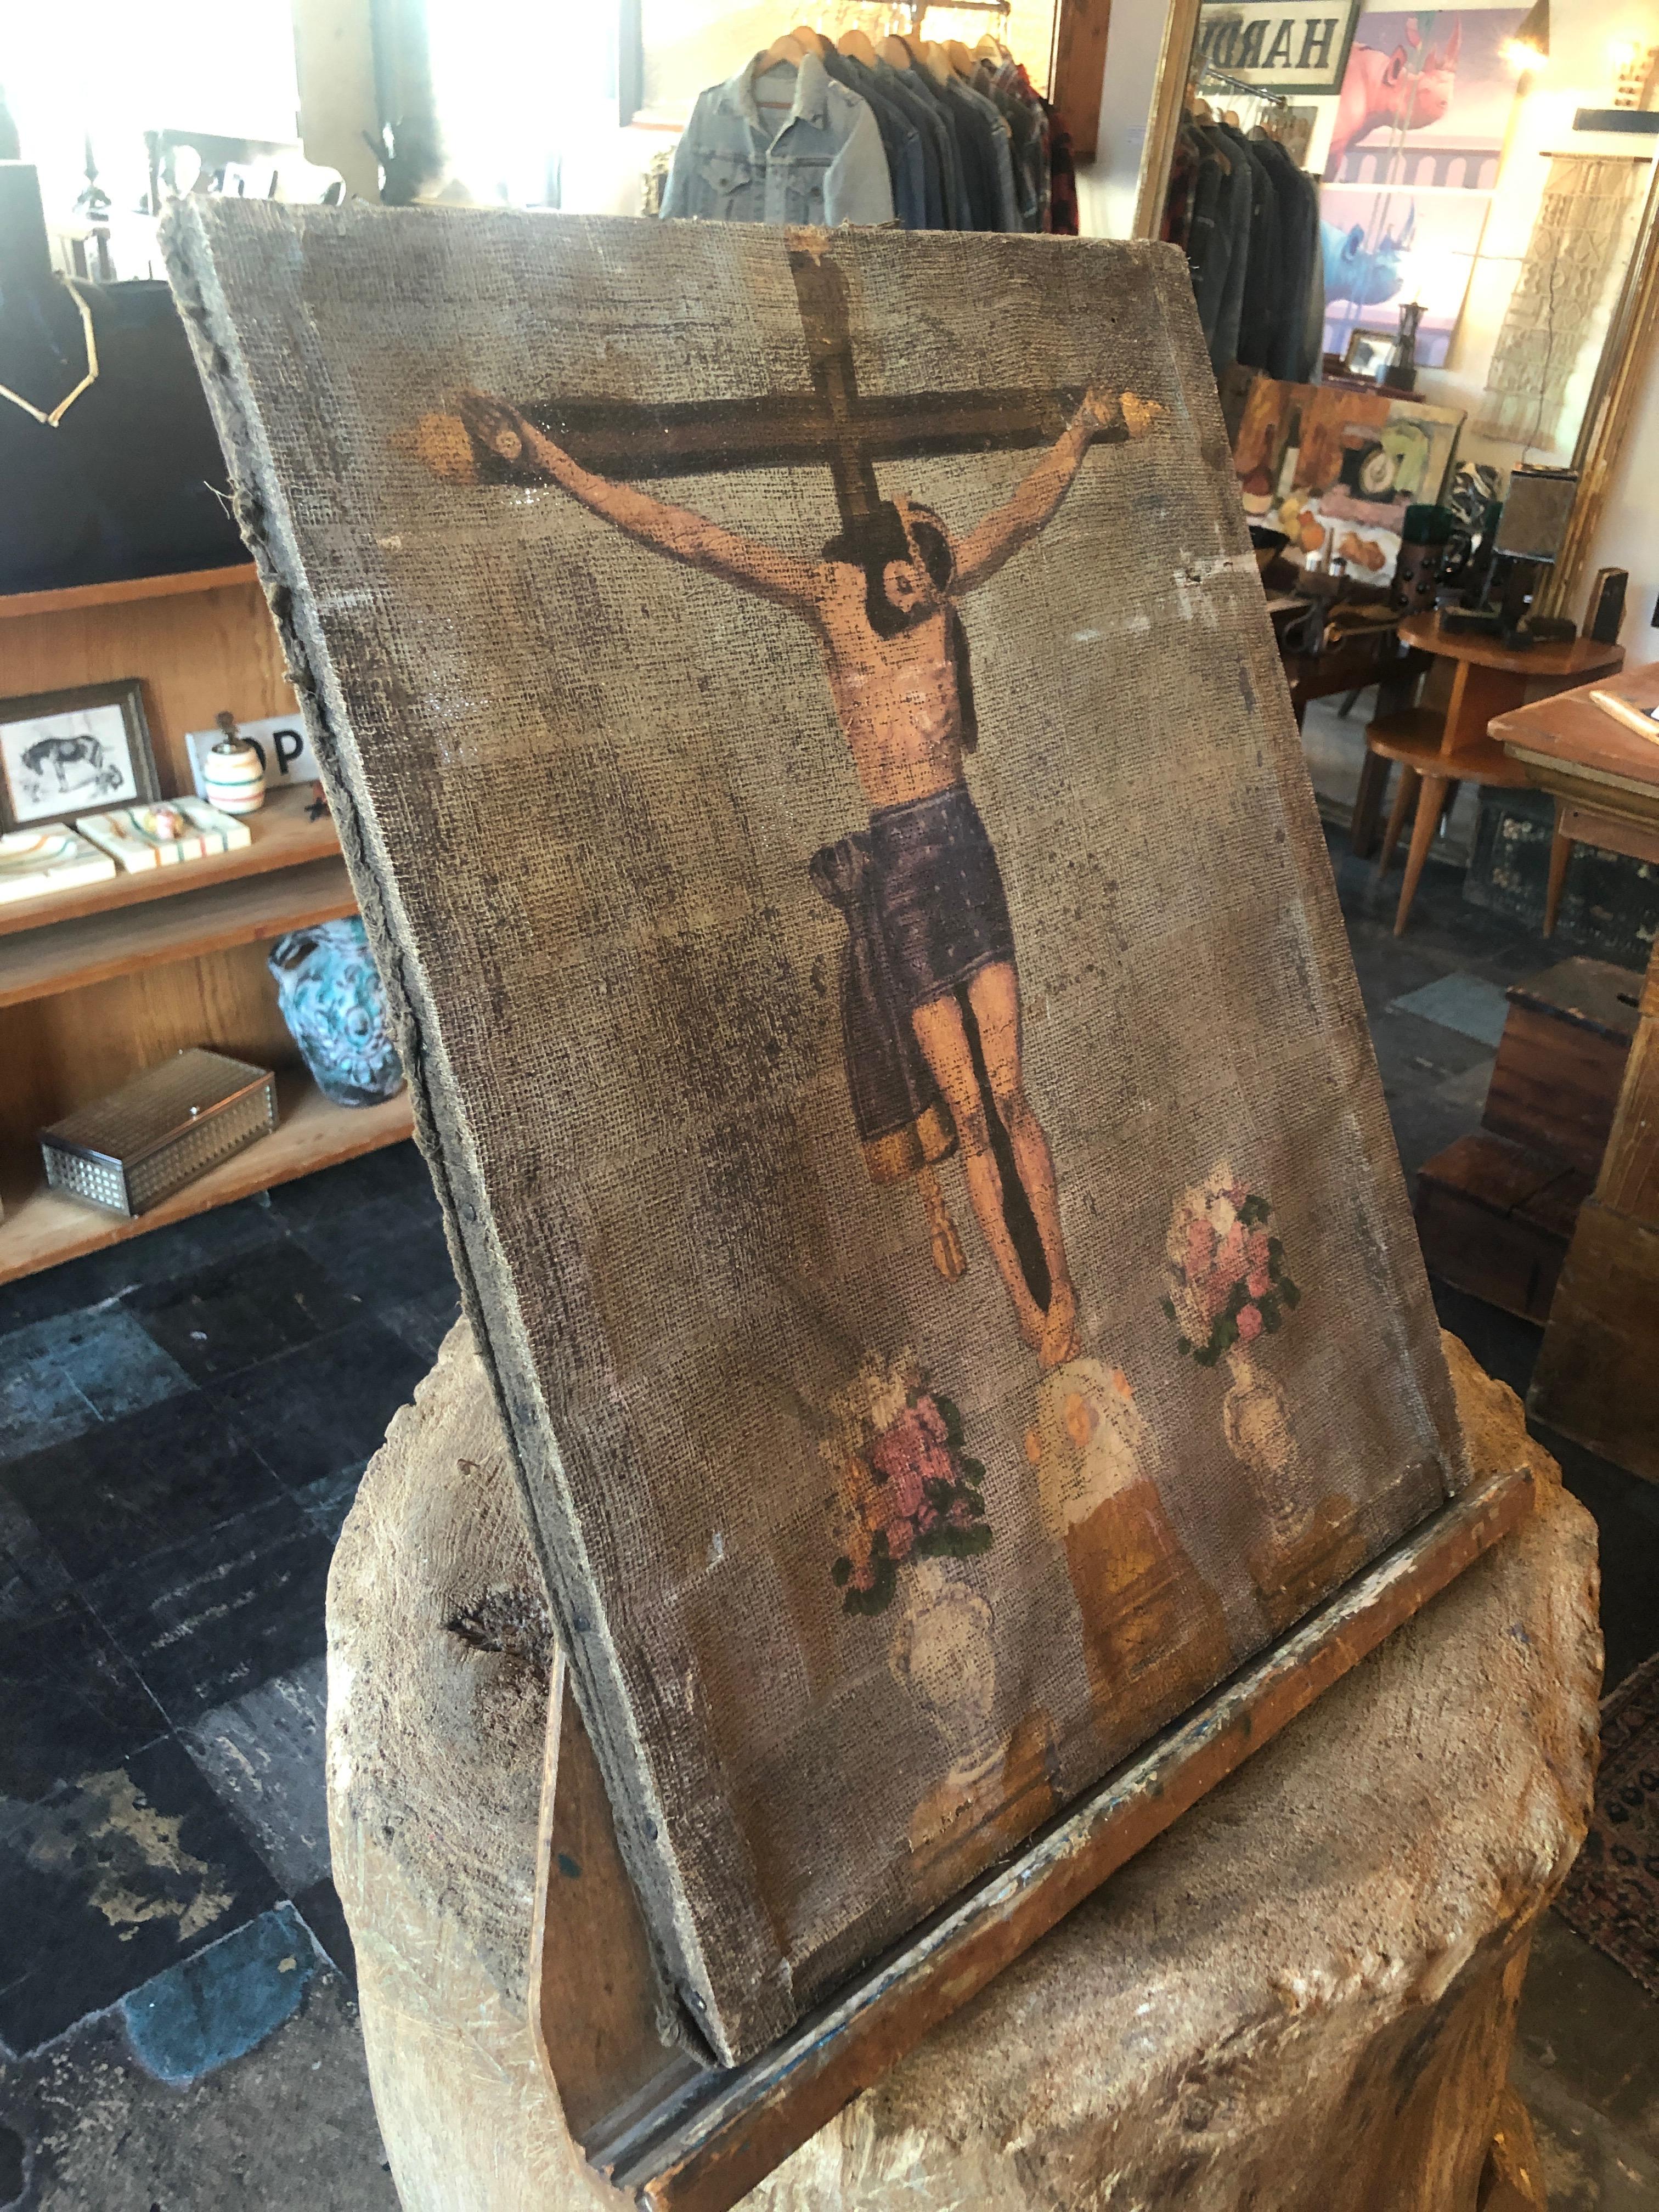 Natural Fiber Turn of the Century Painting of the Crucifixion of Christ on Cloth